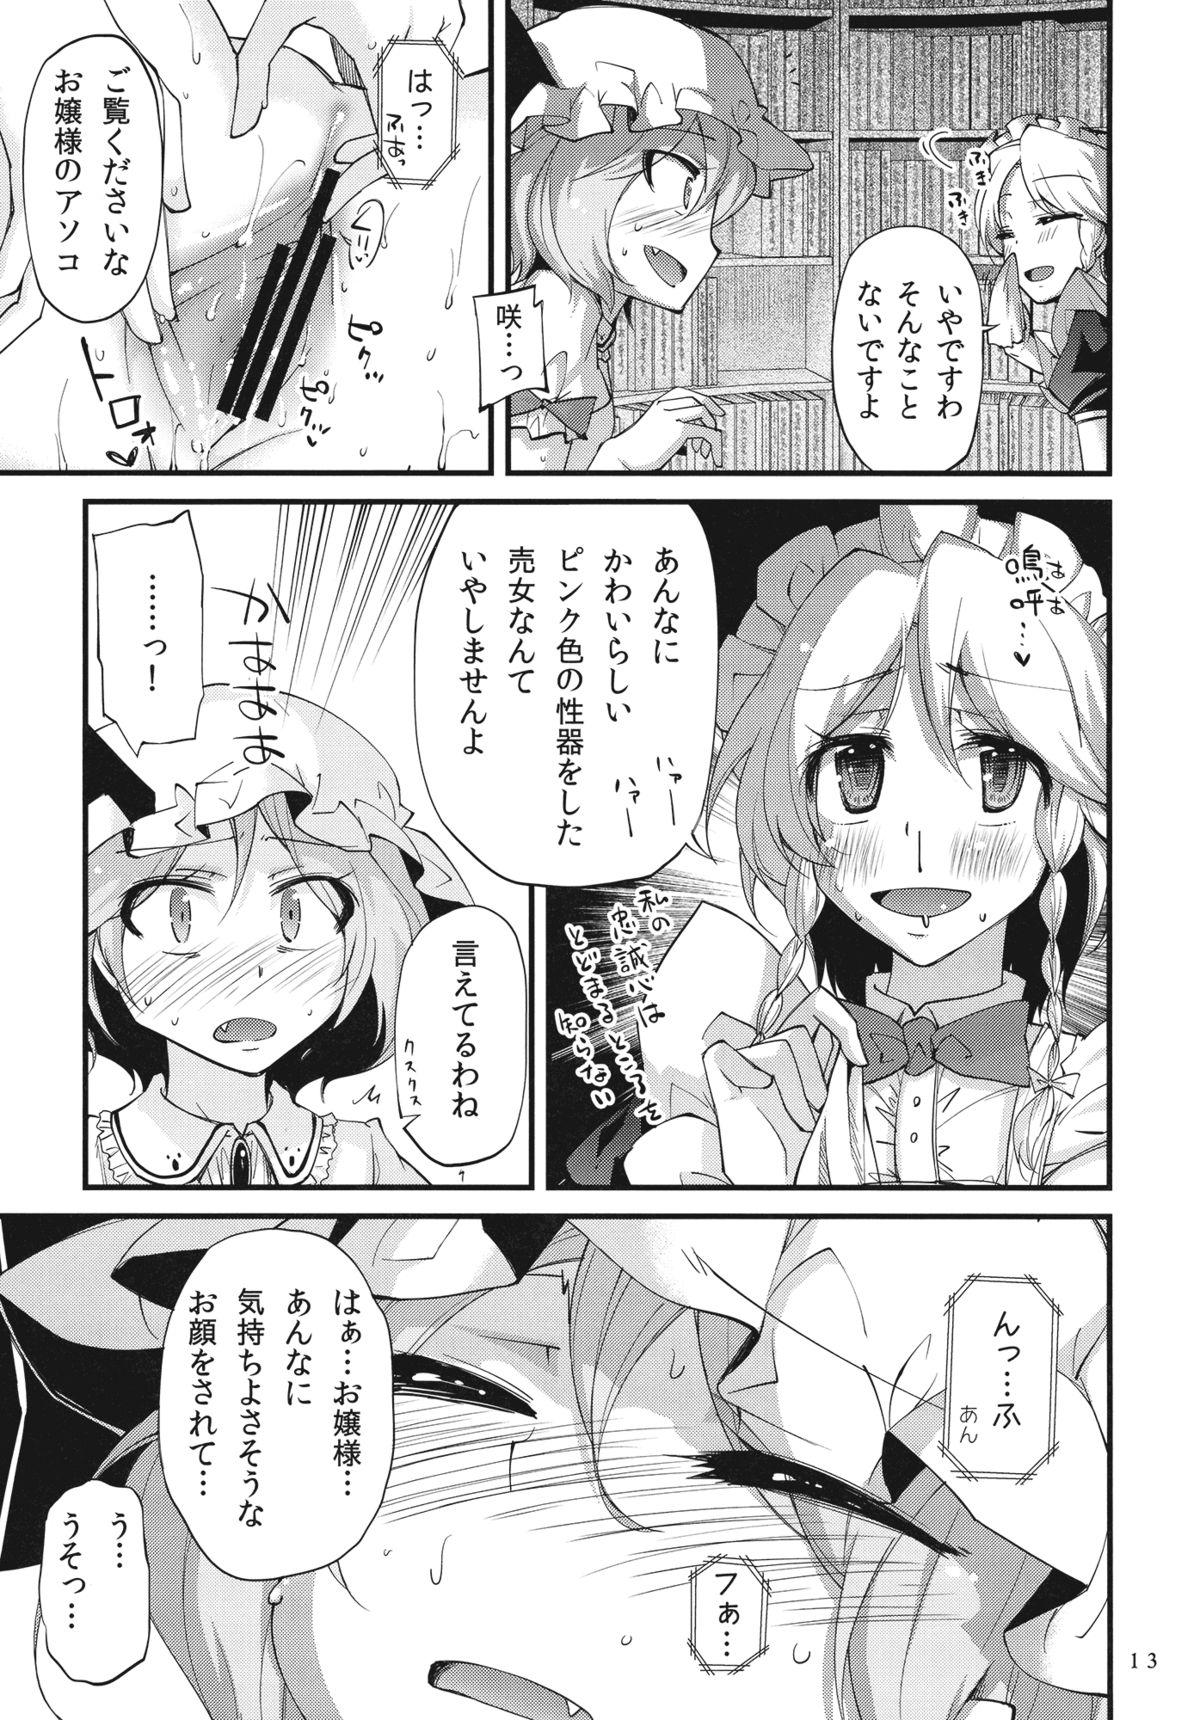 Nurumassage .REC - Touhou project Lovers - Page 13